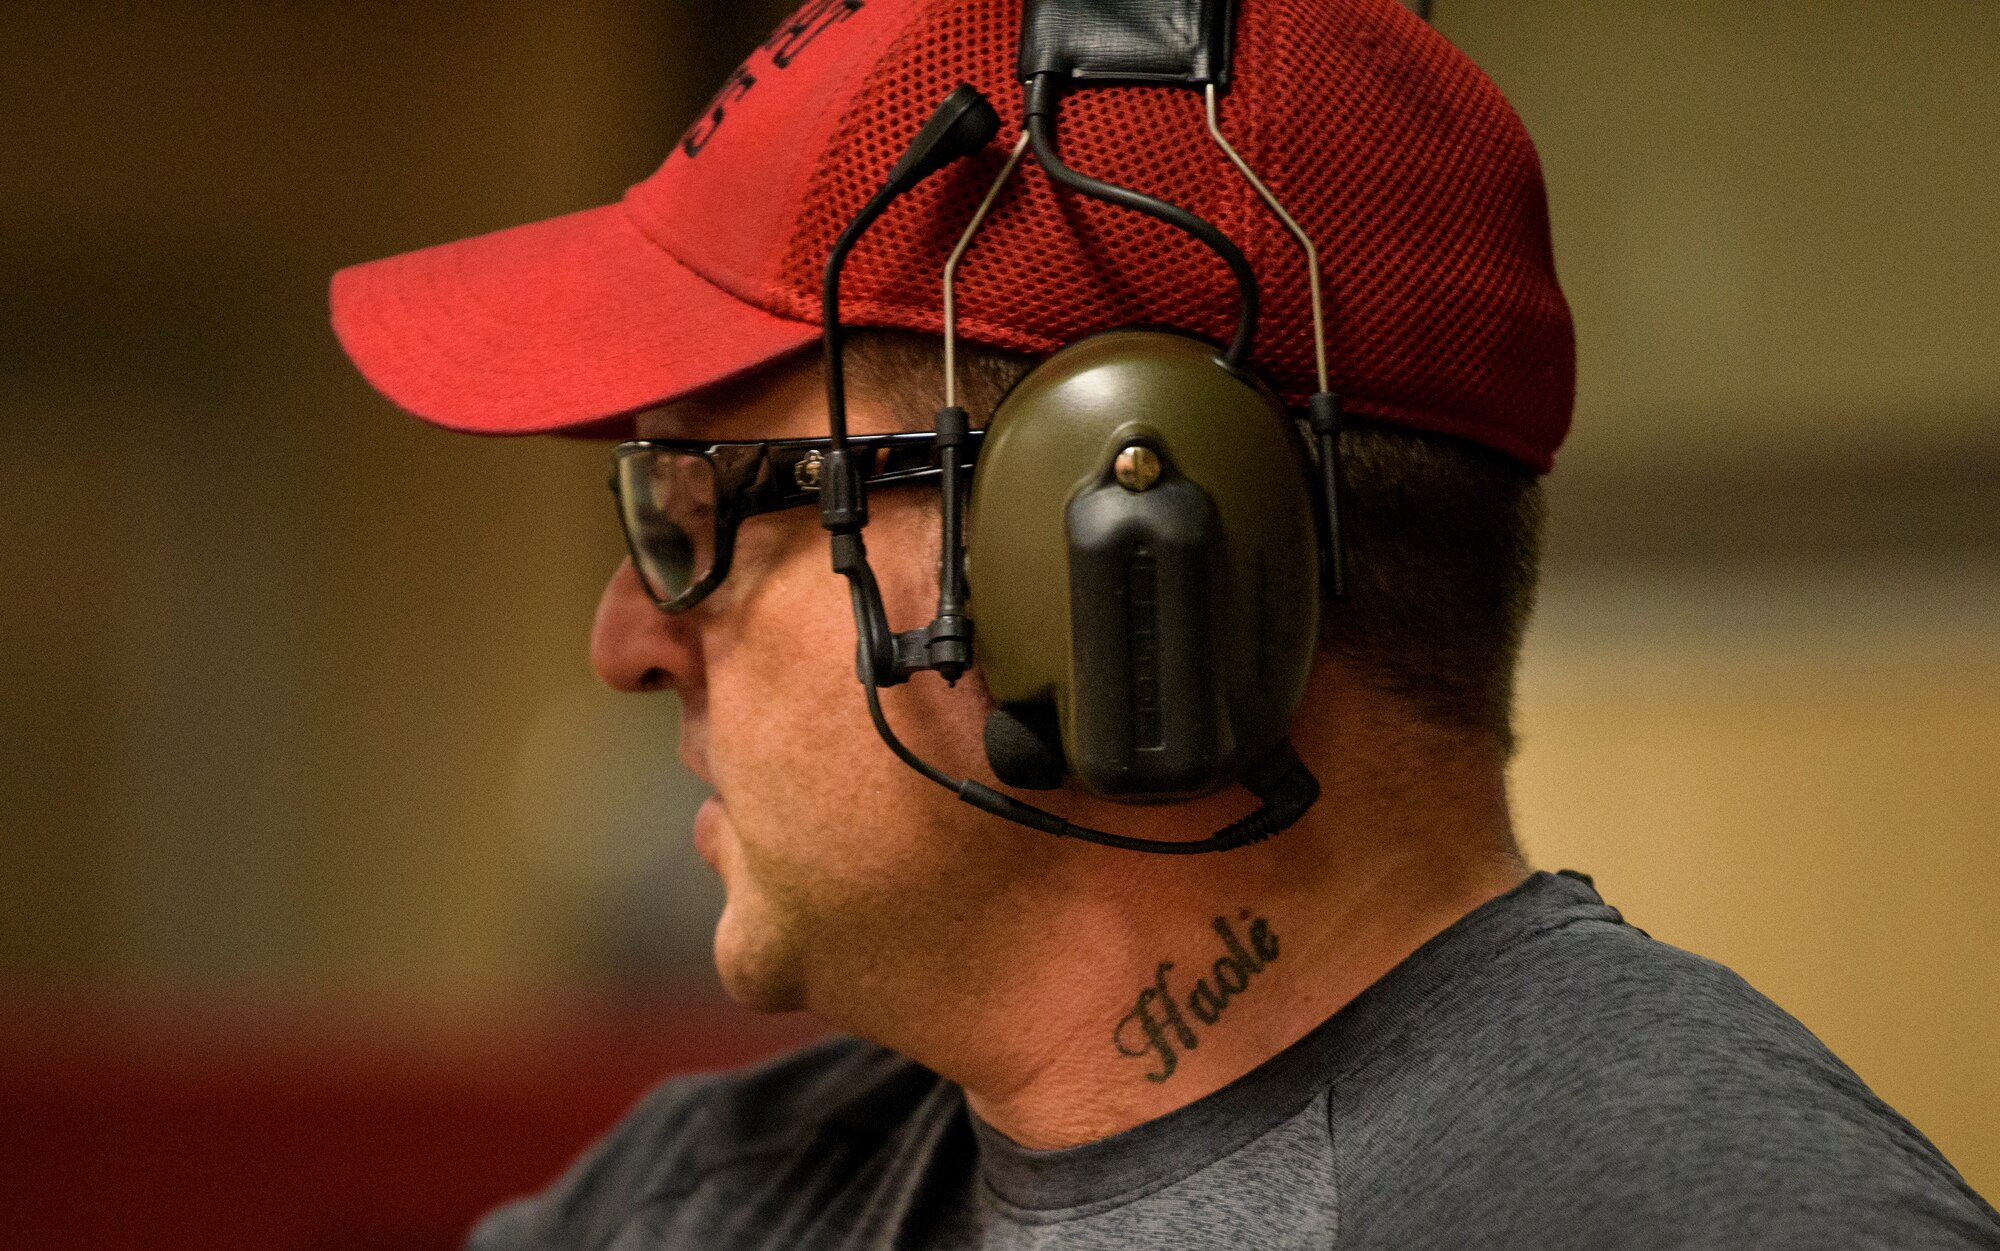 Officer Tim Bull, a Combat Arms Training and Maintenance instructor, looks out over the firing range, April 25, 2018. Bull has a tattoo on his neck with the word "haole". The word has two meanings according to Bull, meaning both "breath" and being an outsider to Hawaiian culture. Bull also served in the United States Army as an infantryman and was stationed in Hawaii where he met his wife who was a Hawaii native. (U.S. Air Force photo by Airman 1st Class Dalton Williams)